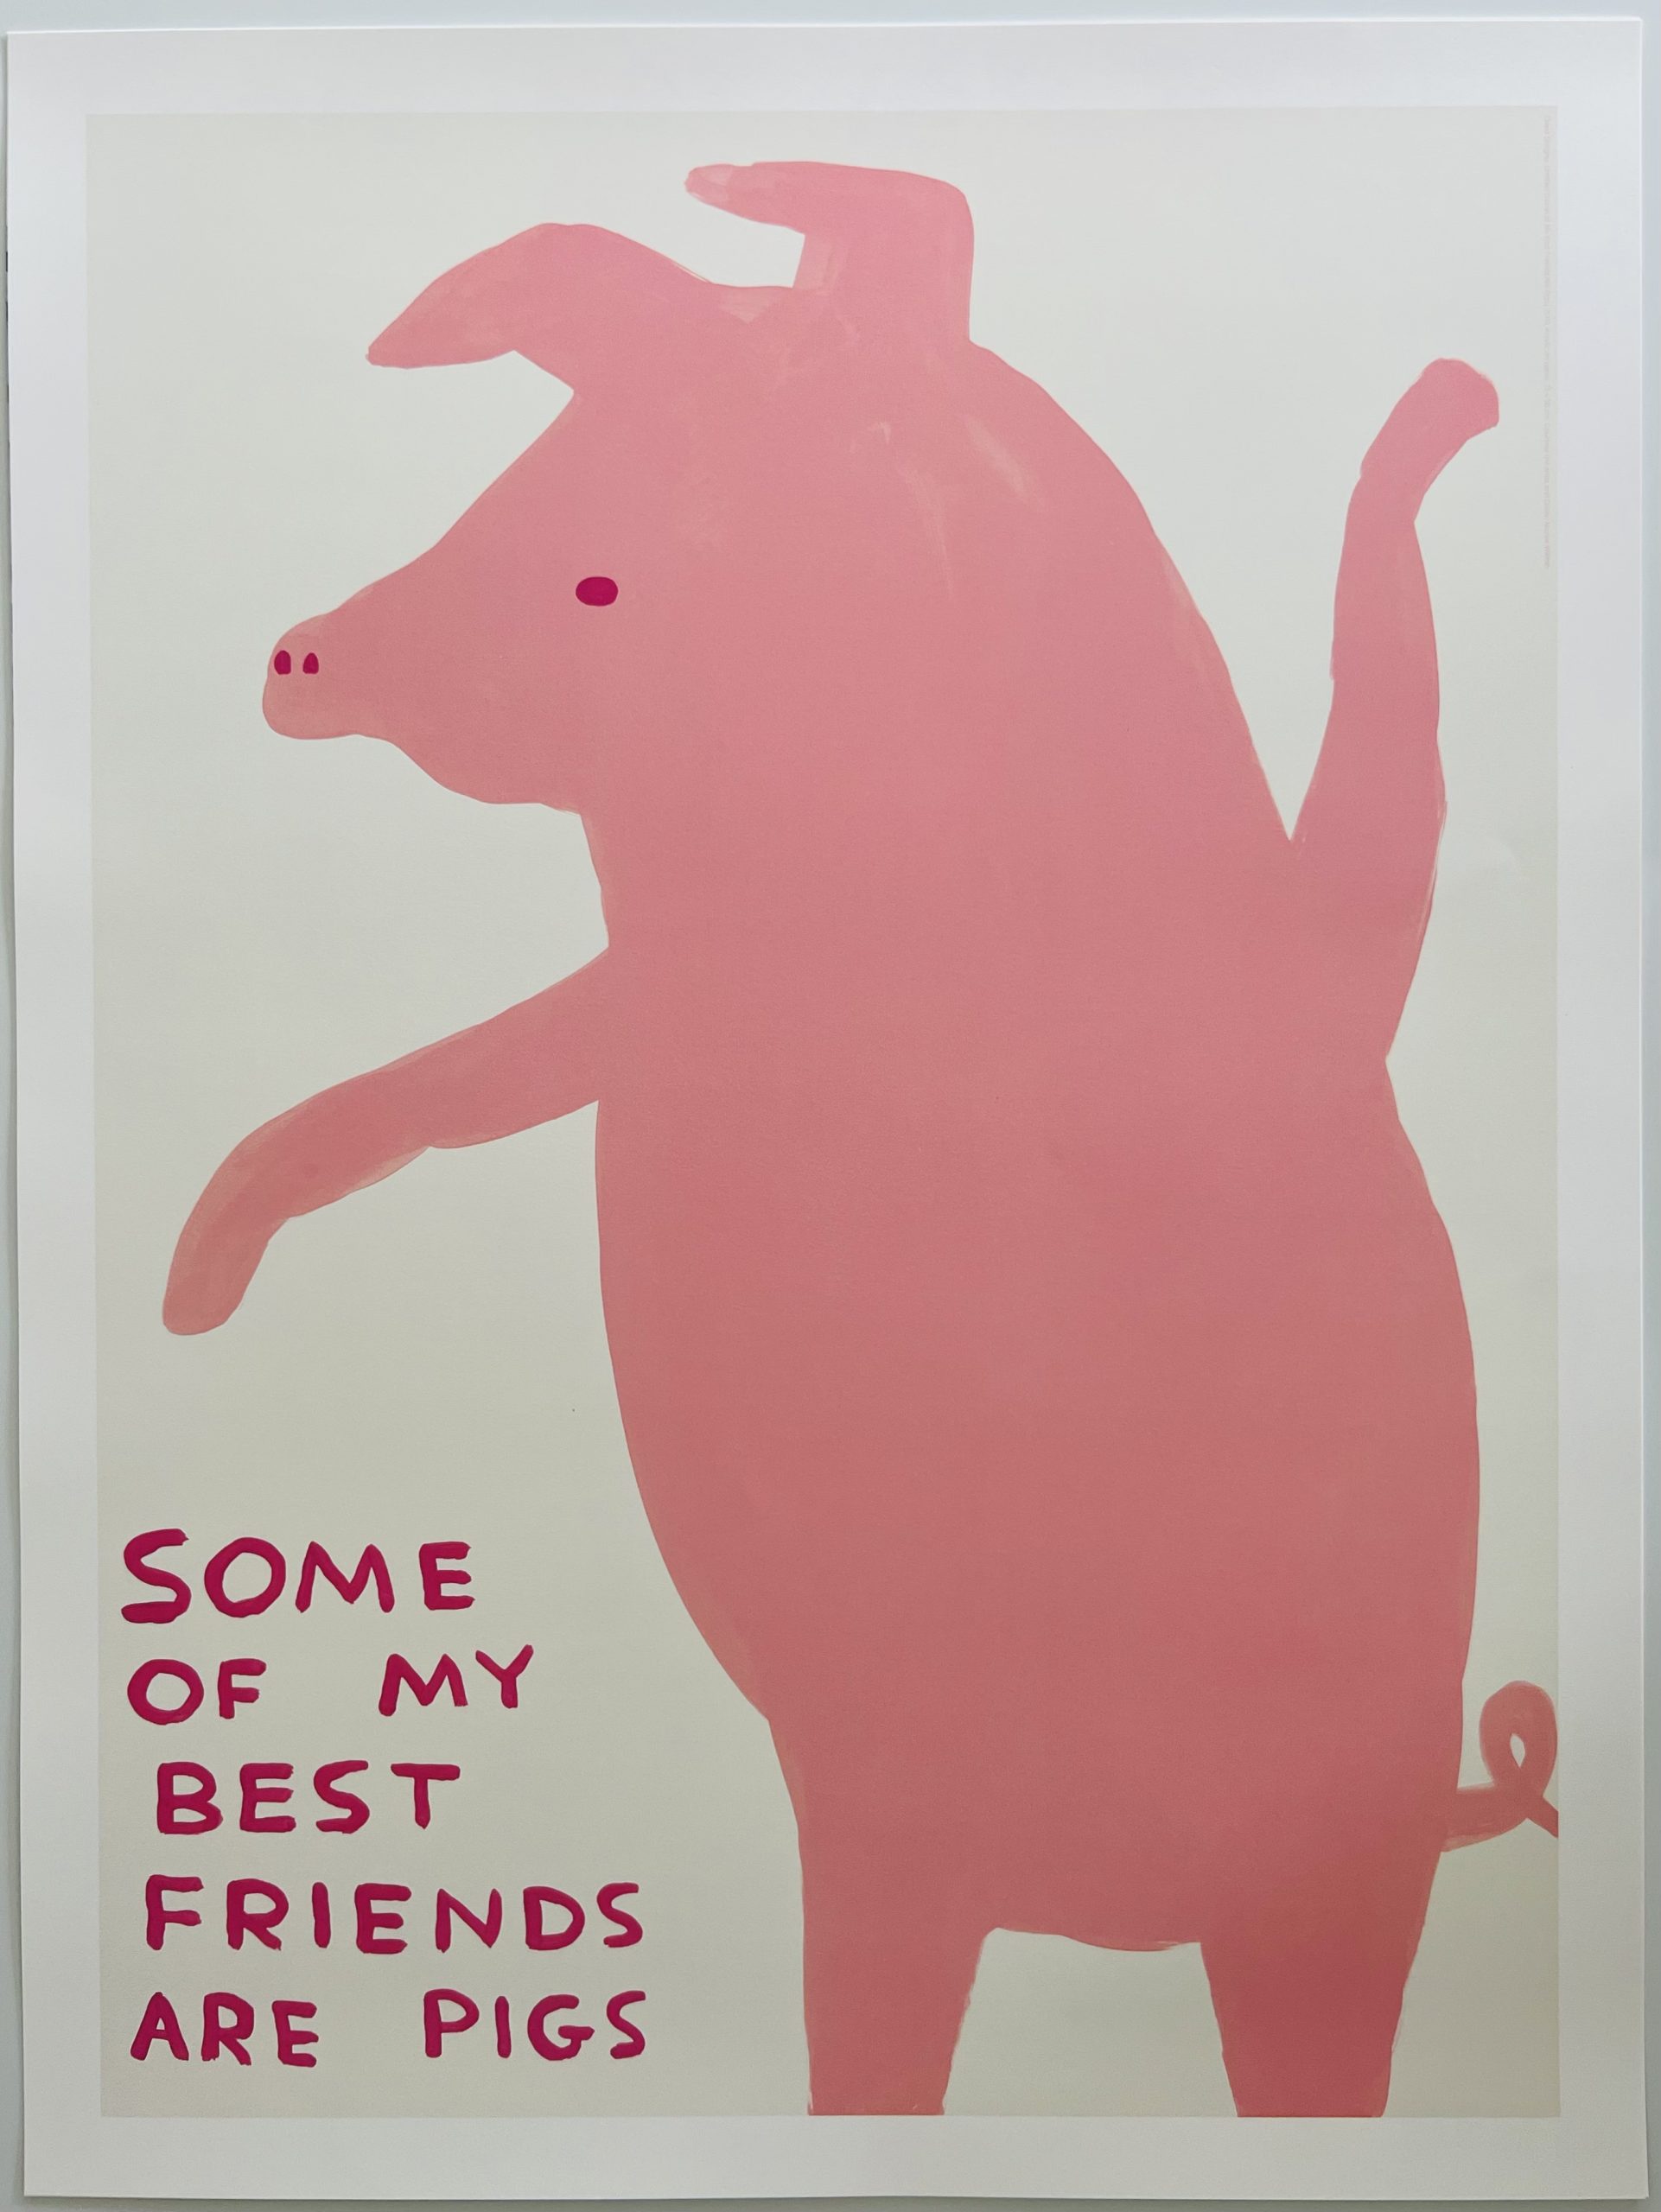 Some of my best friends are pigs by david shrigley